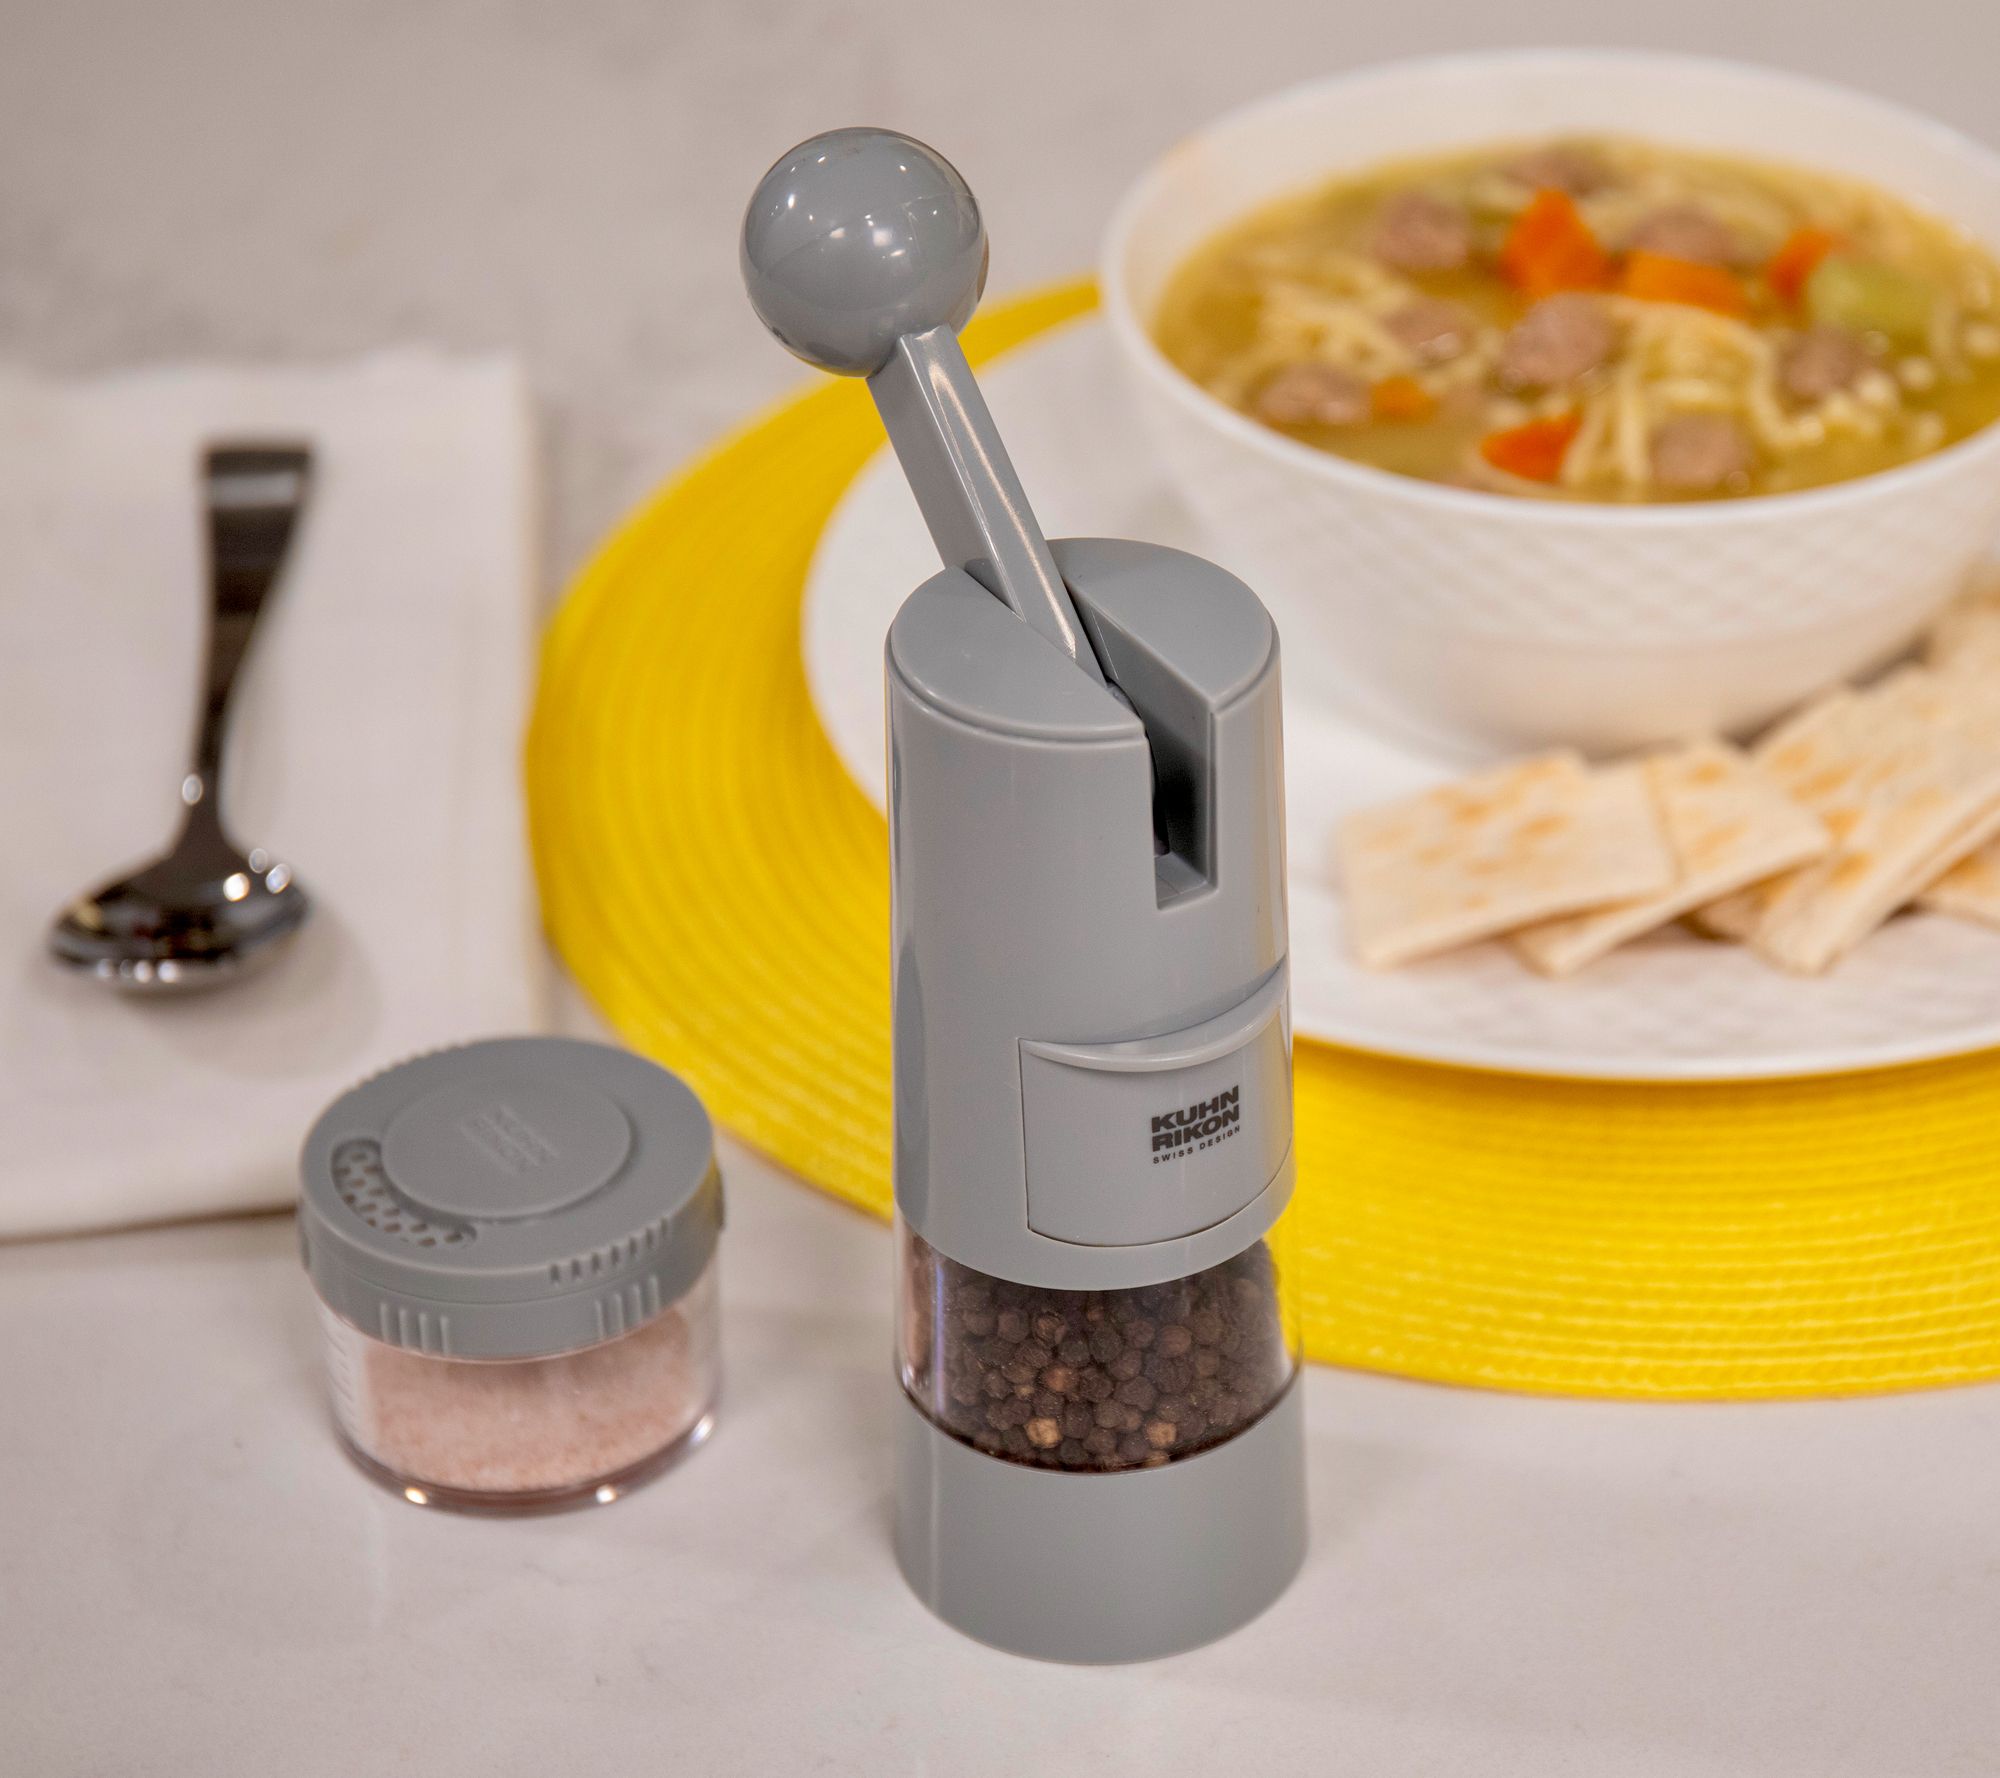 Cleaning a spice grinder - Cookware - Food Talk Central